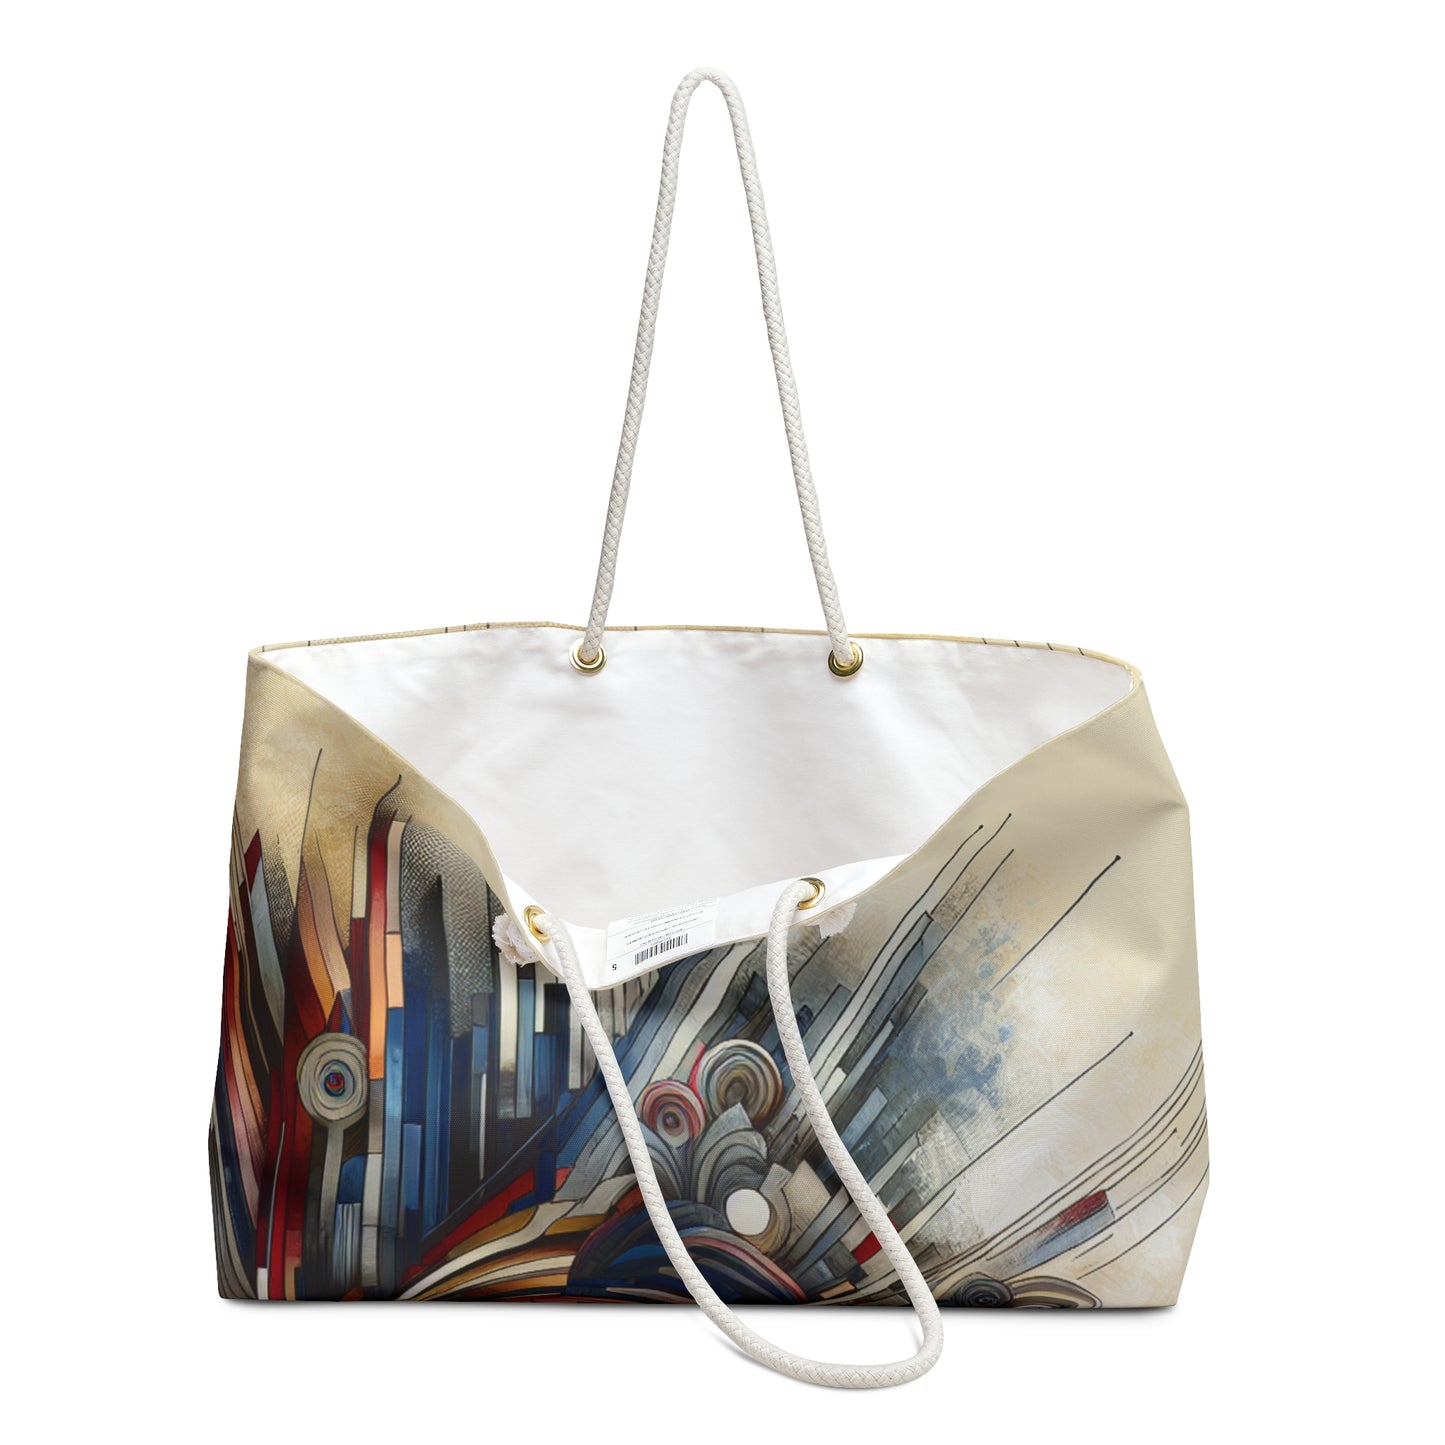 "Fragmented Realms: A Surreal Exploration in Color and Form" - The Alien Weekender Bag Avant-garde Art